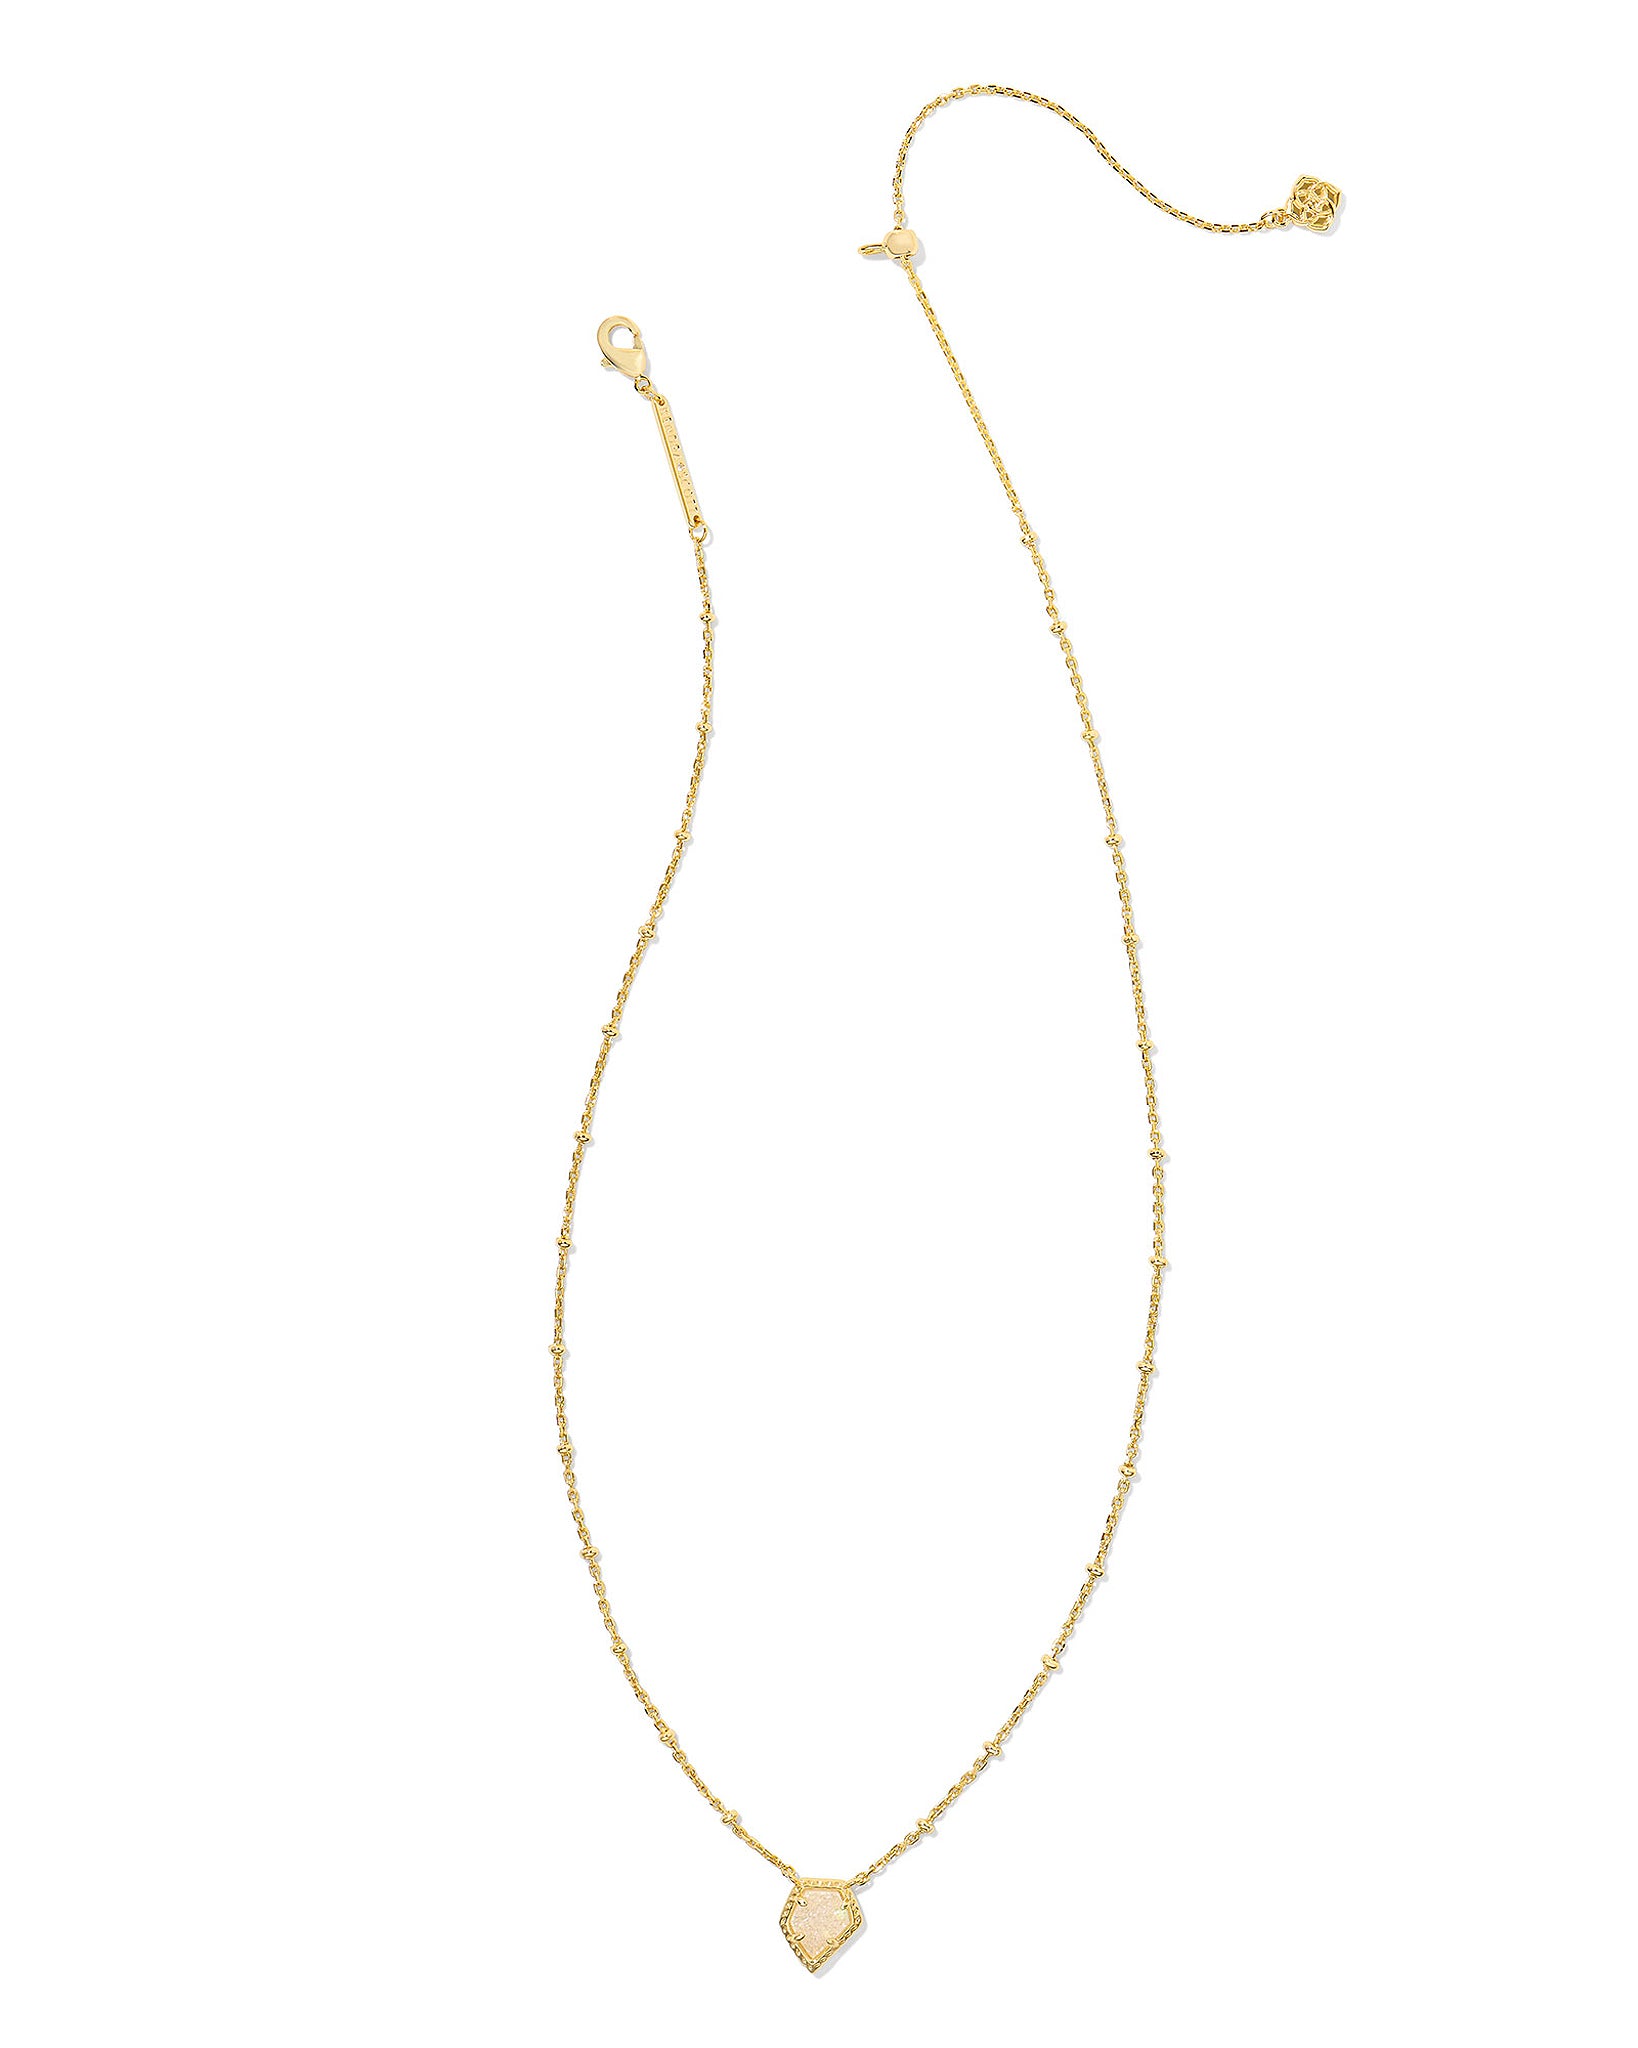 Kendra Scott Tessa Framed Satellite Chain Pendant Necklace in Iridescent Drusy and Gold Plated